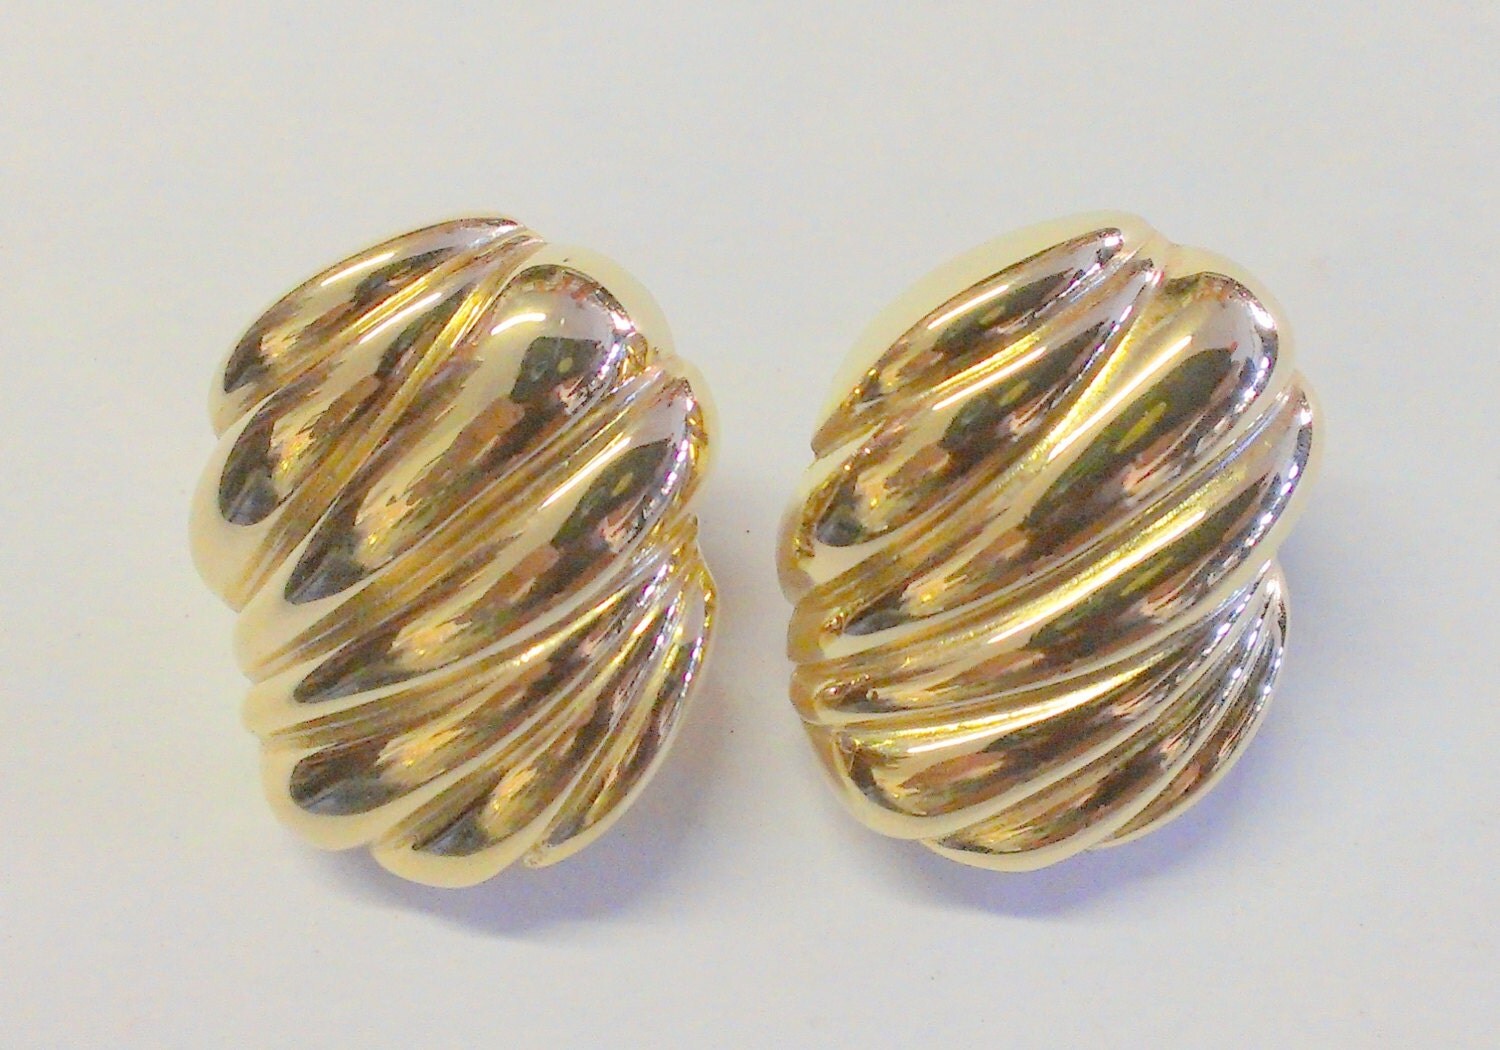 Vintage Gold Givenchy Post Earrings by TrendyTreasures1 on Etsy